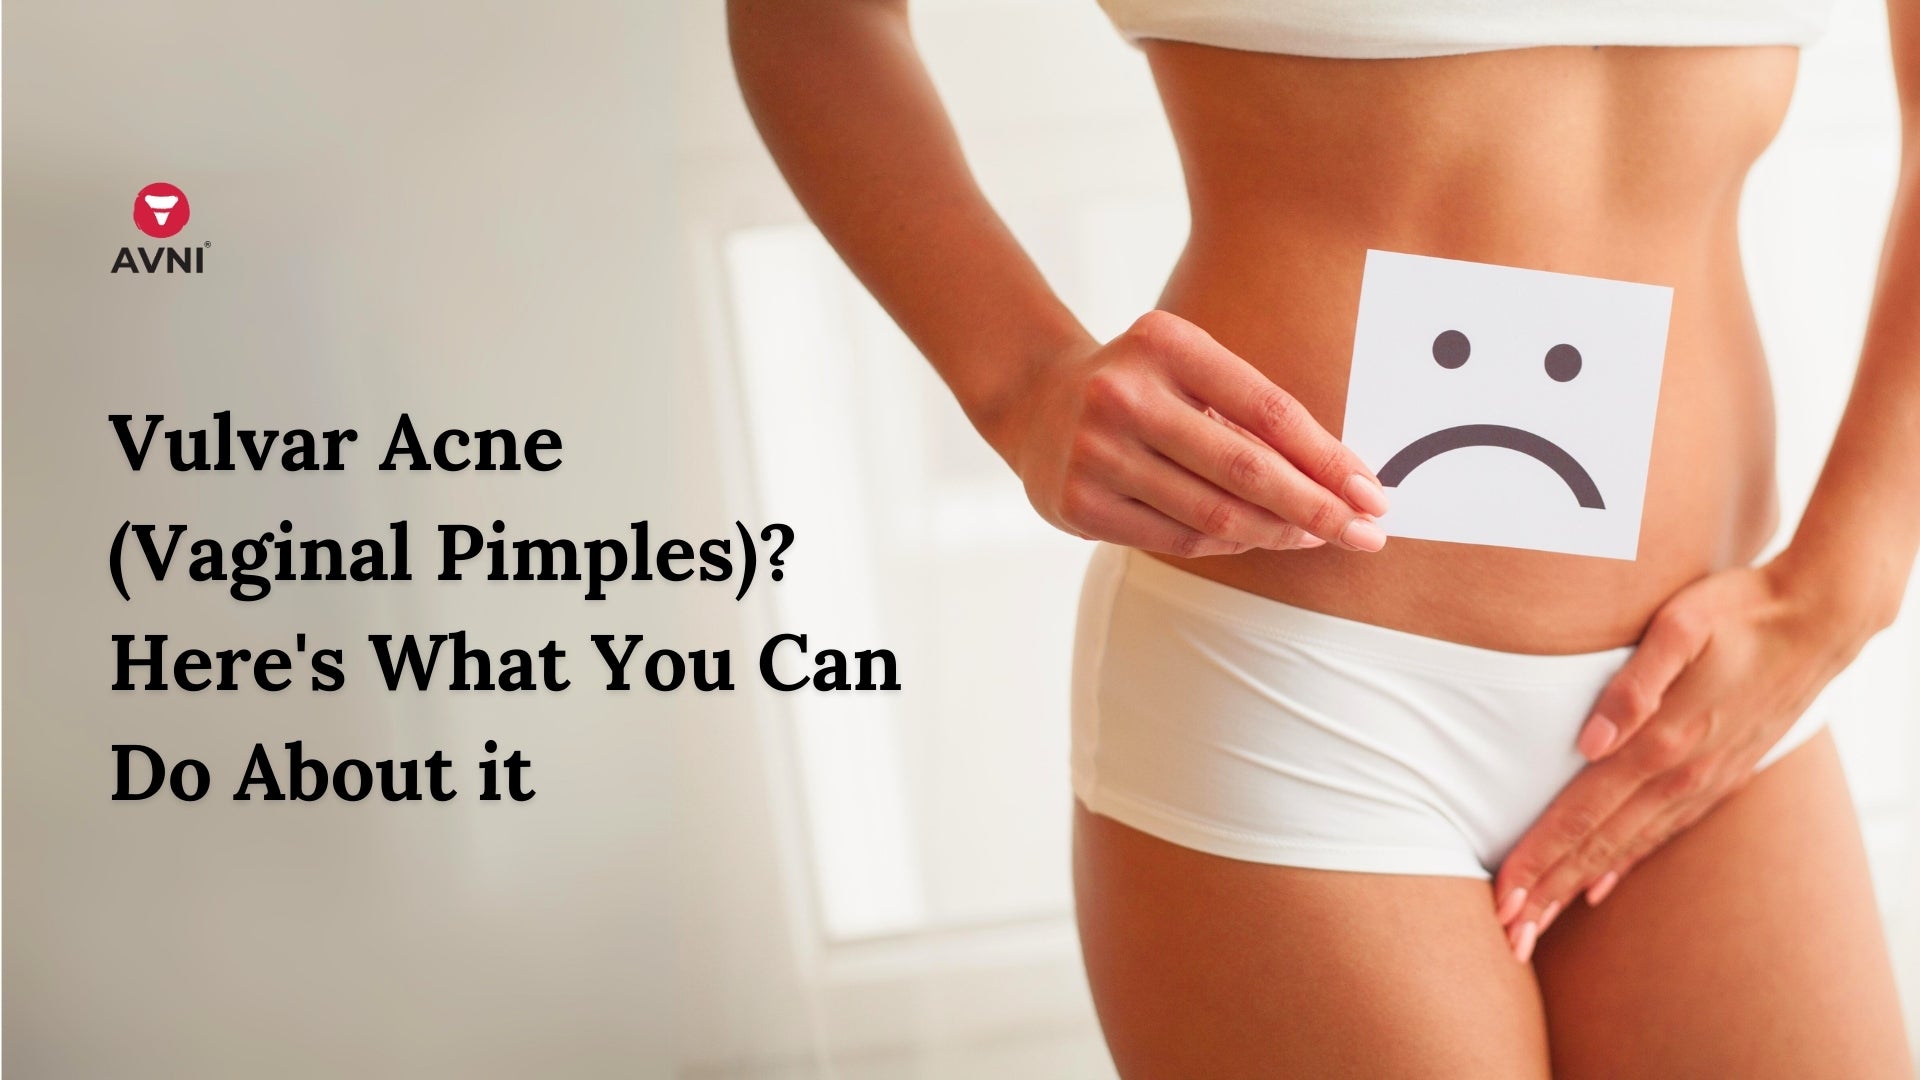 http://www.myavni.com/cdn/shop/articles/Vulvar_Acne_Vaginal_Pimples___Here_s_What_You_Can_Do_About_it.jpg?v=1704308686&width=2048